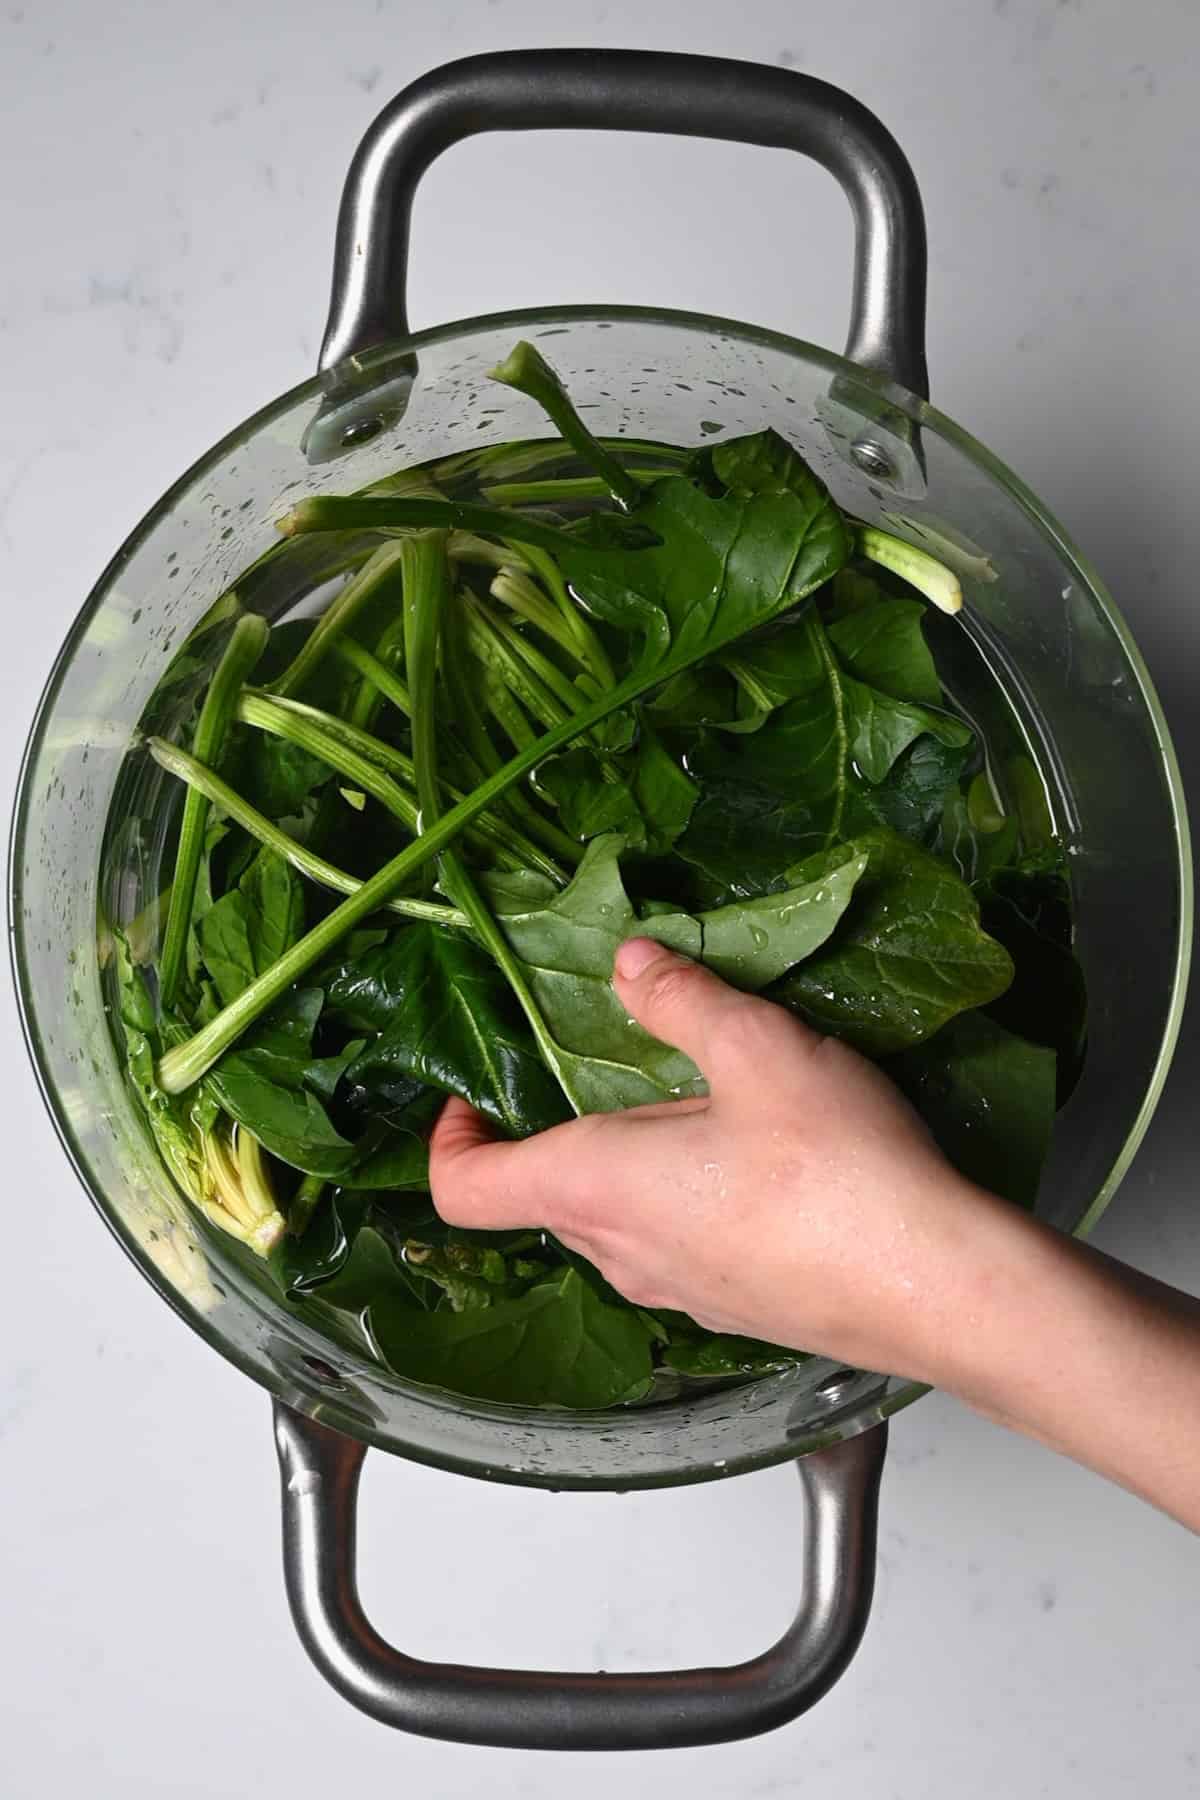 Washing spinach in a large bowl of water